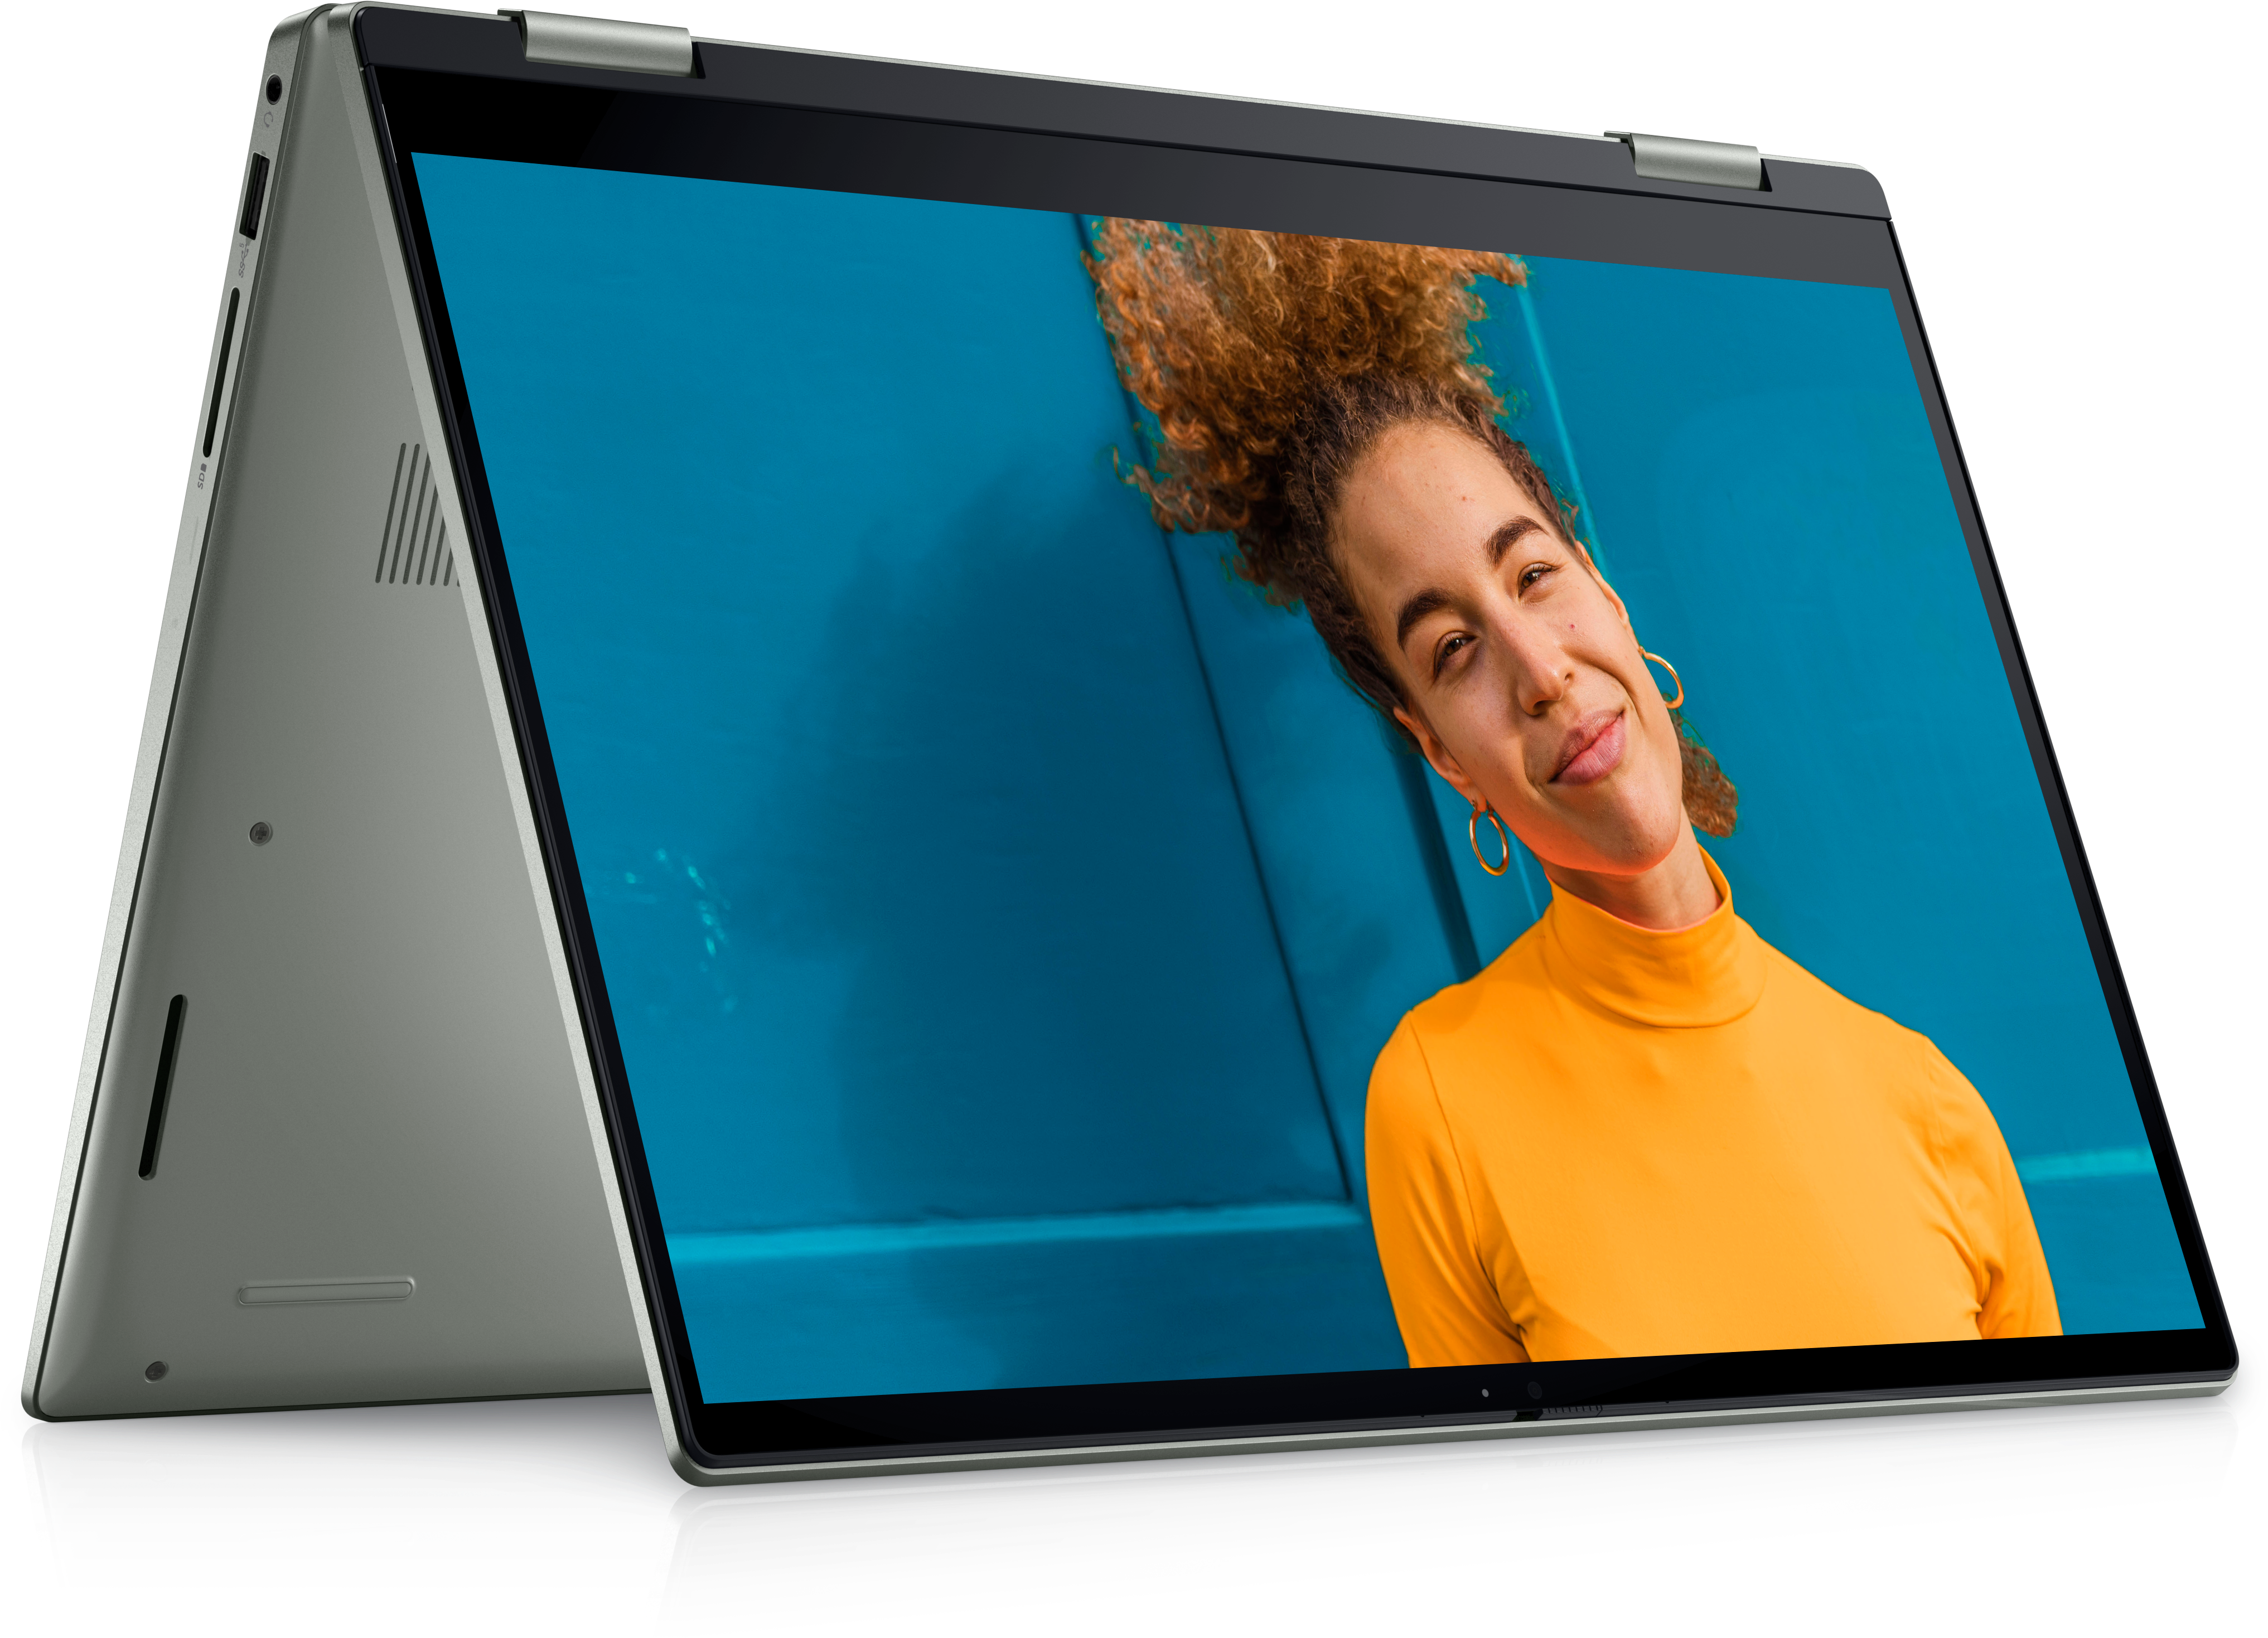 Inspiron 7425 2-in-1 Laptop with AMD Mobile Processor | Dell India